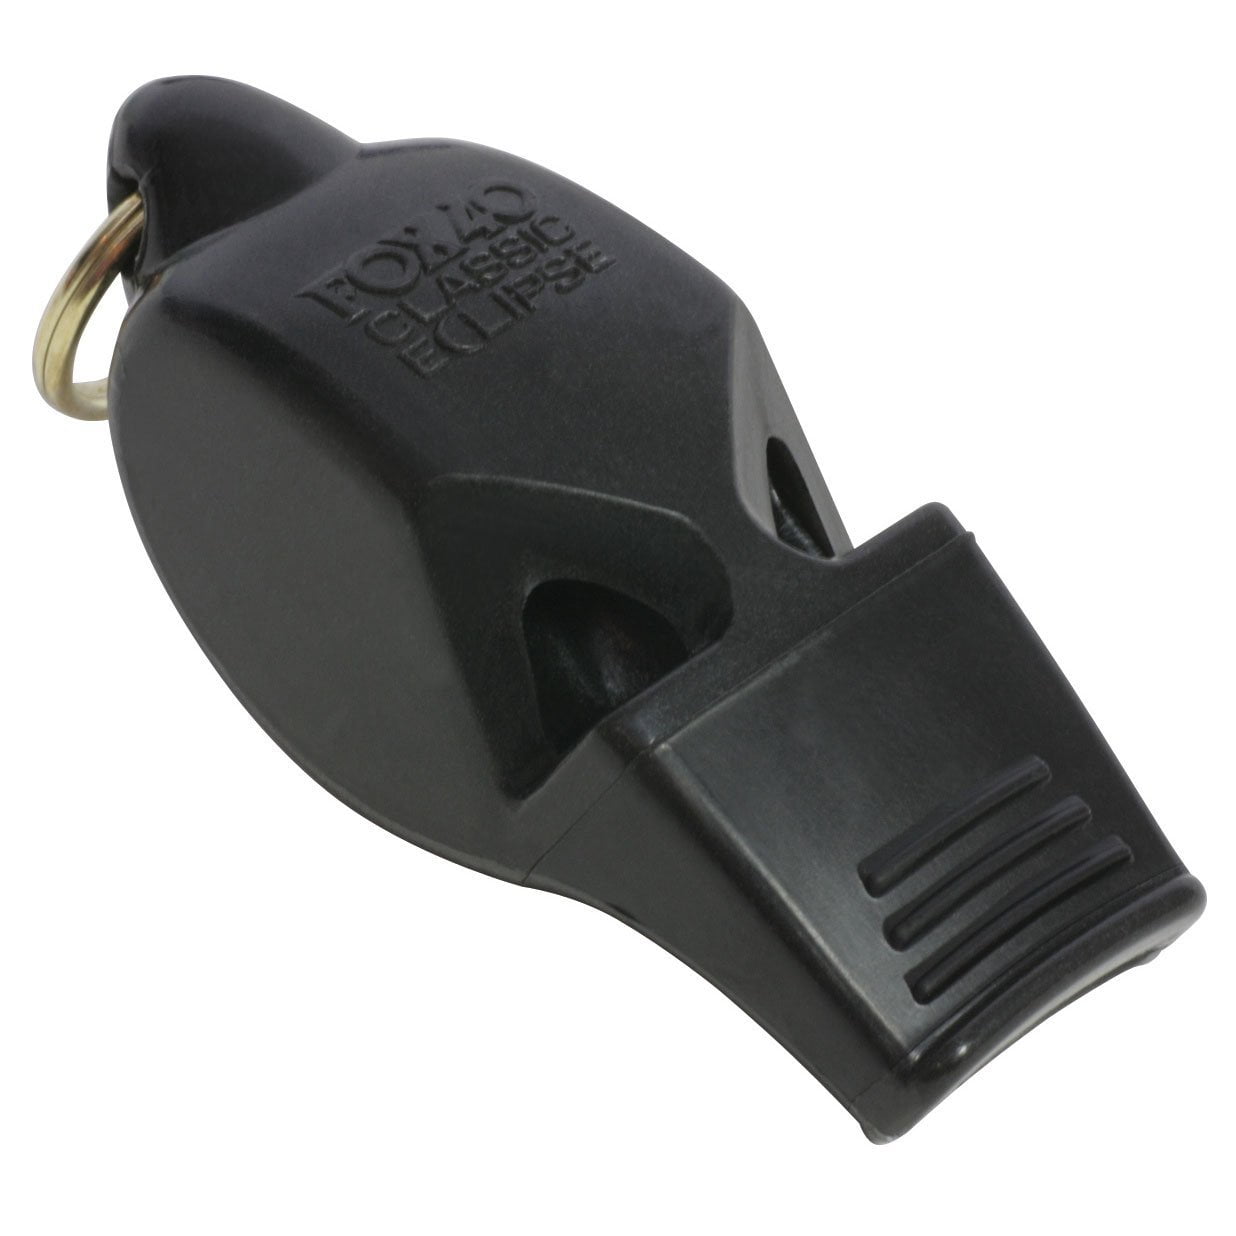 Fox 40 Epik CMG Official Whistle and Strap 